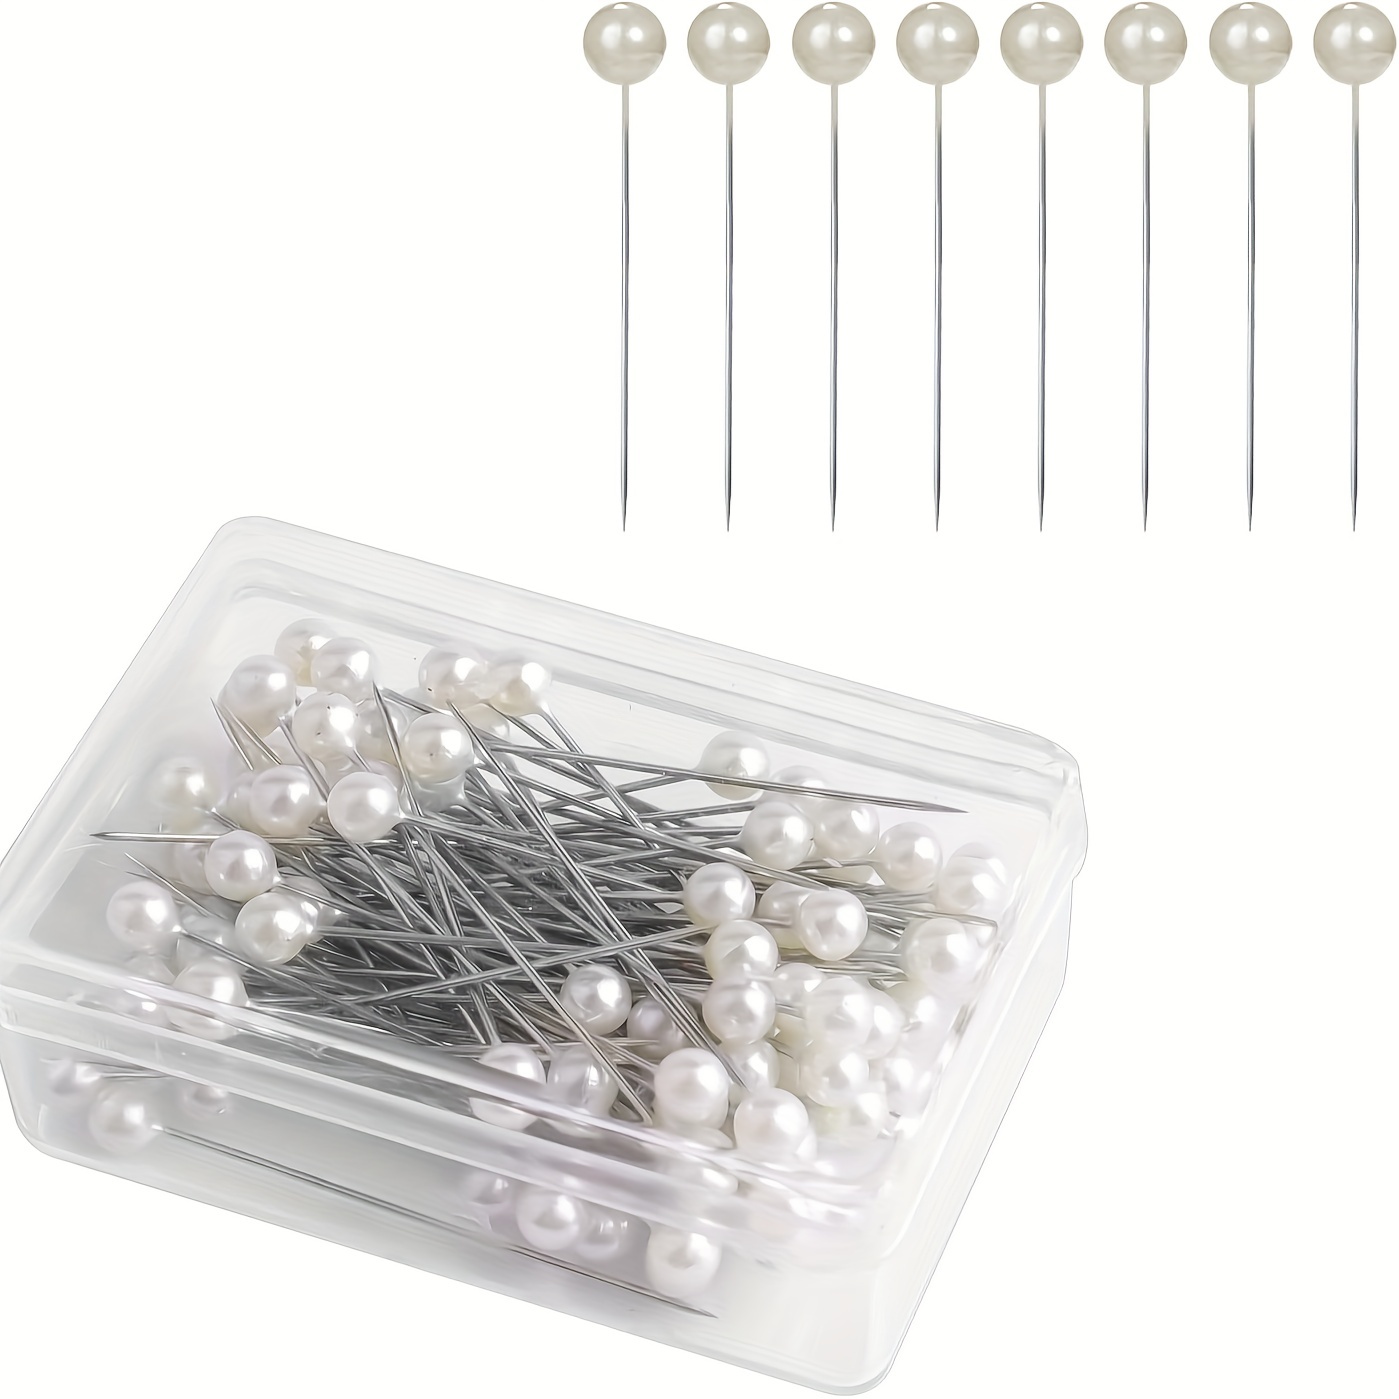 50pcs/box Crystal Head Sewing Pins Acrylic Pearl Bouquet Pins Diamond Head  Pins For Dressmaking Quilting Straight Pins - Sewing Tools & Accessory -  AliExpress